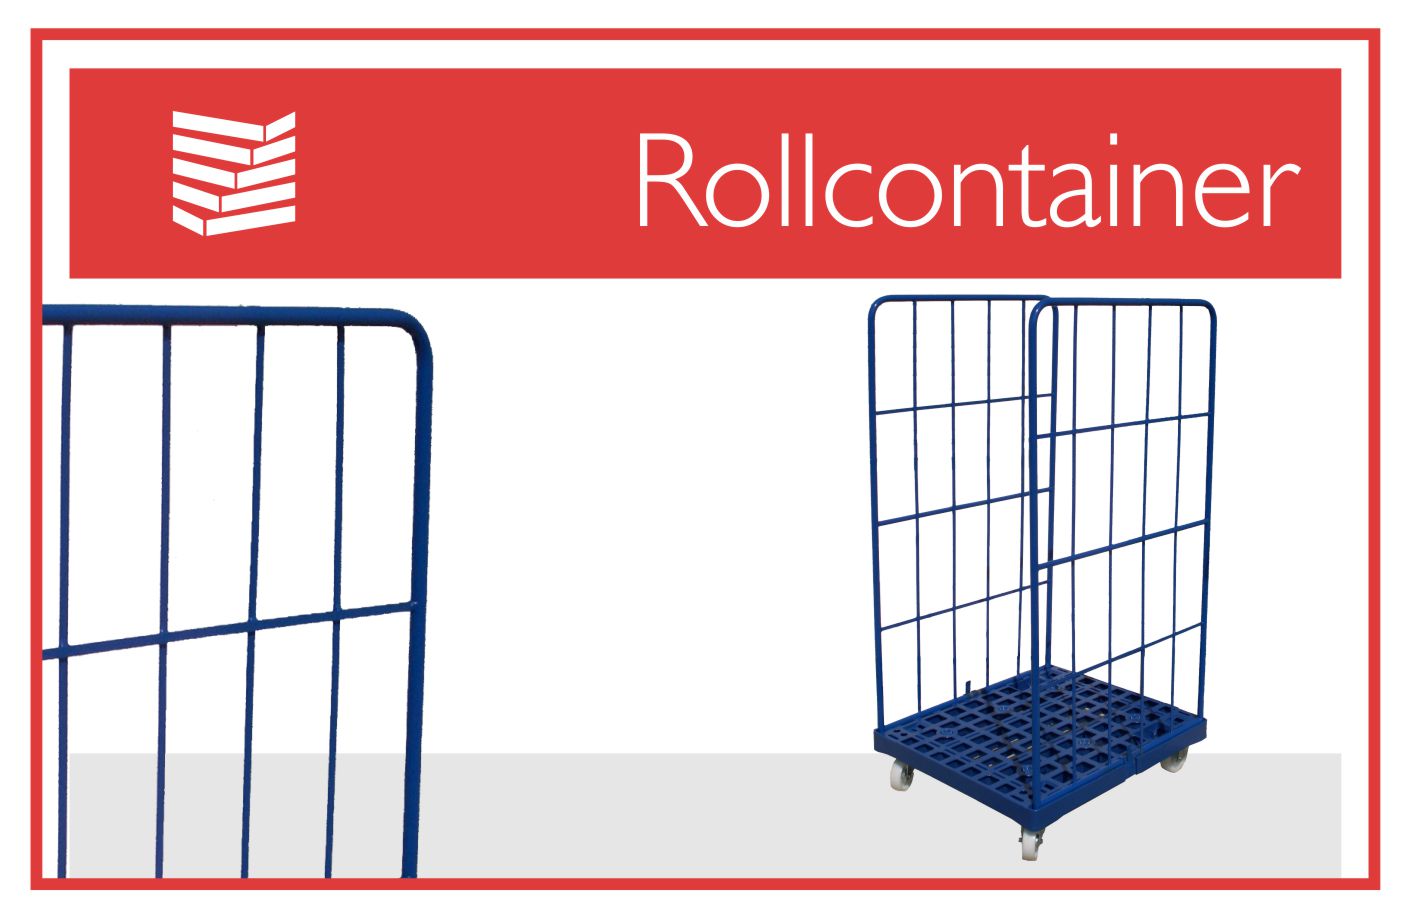 Rollcontainer